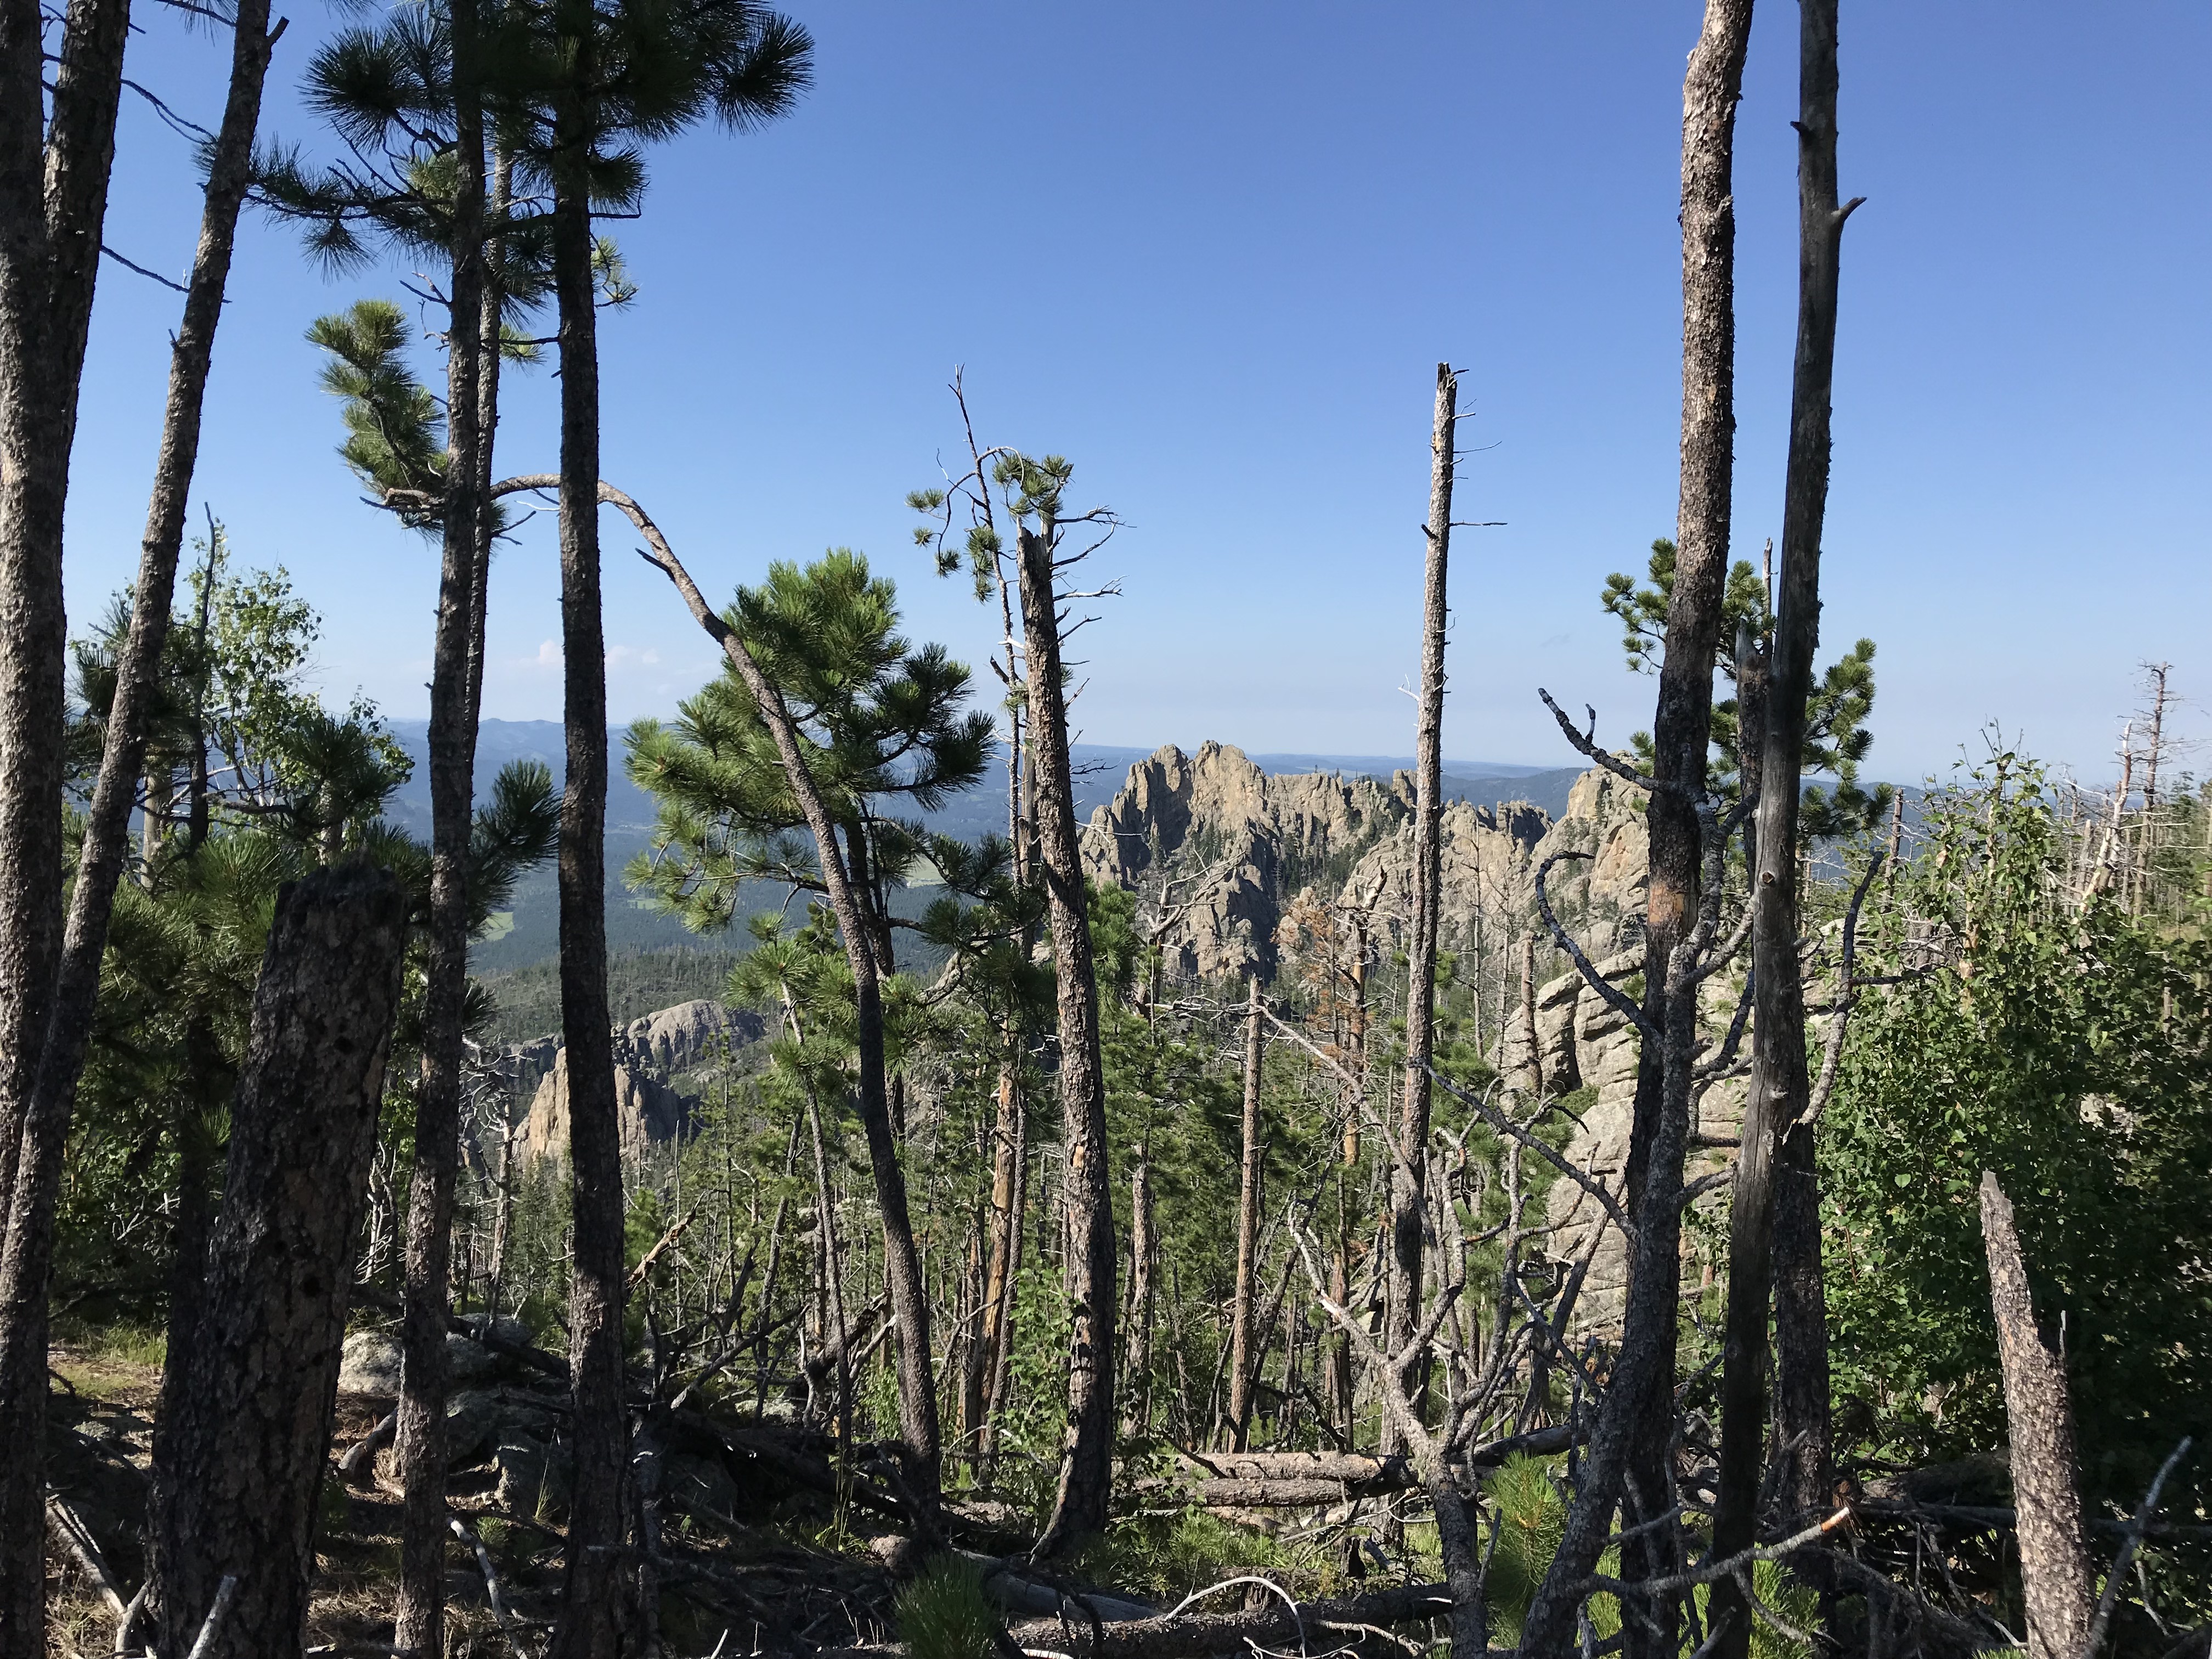 View through sparse pine trees of large, craggy rocks, all under a clear, blue sky